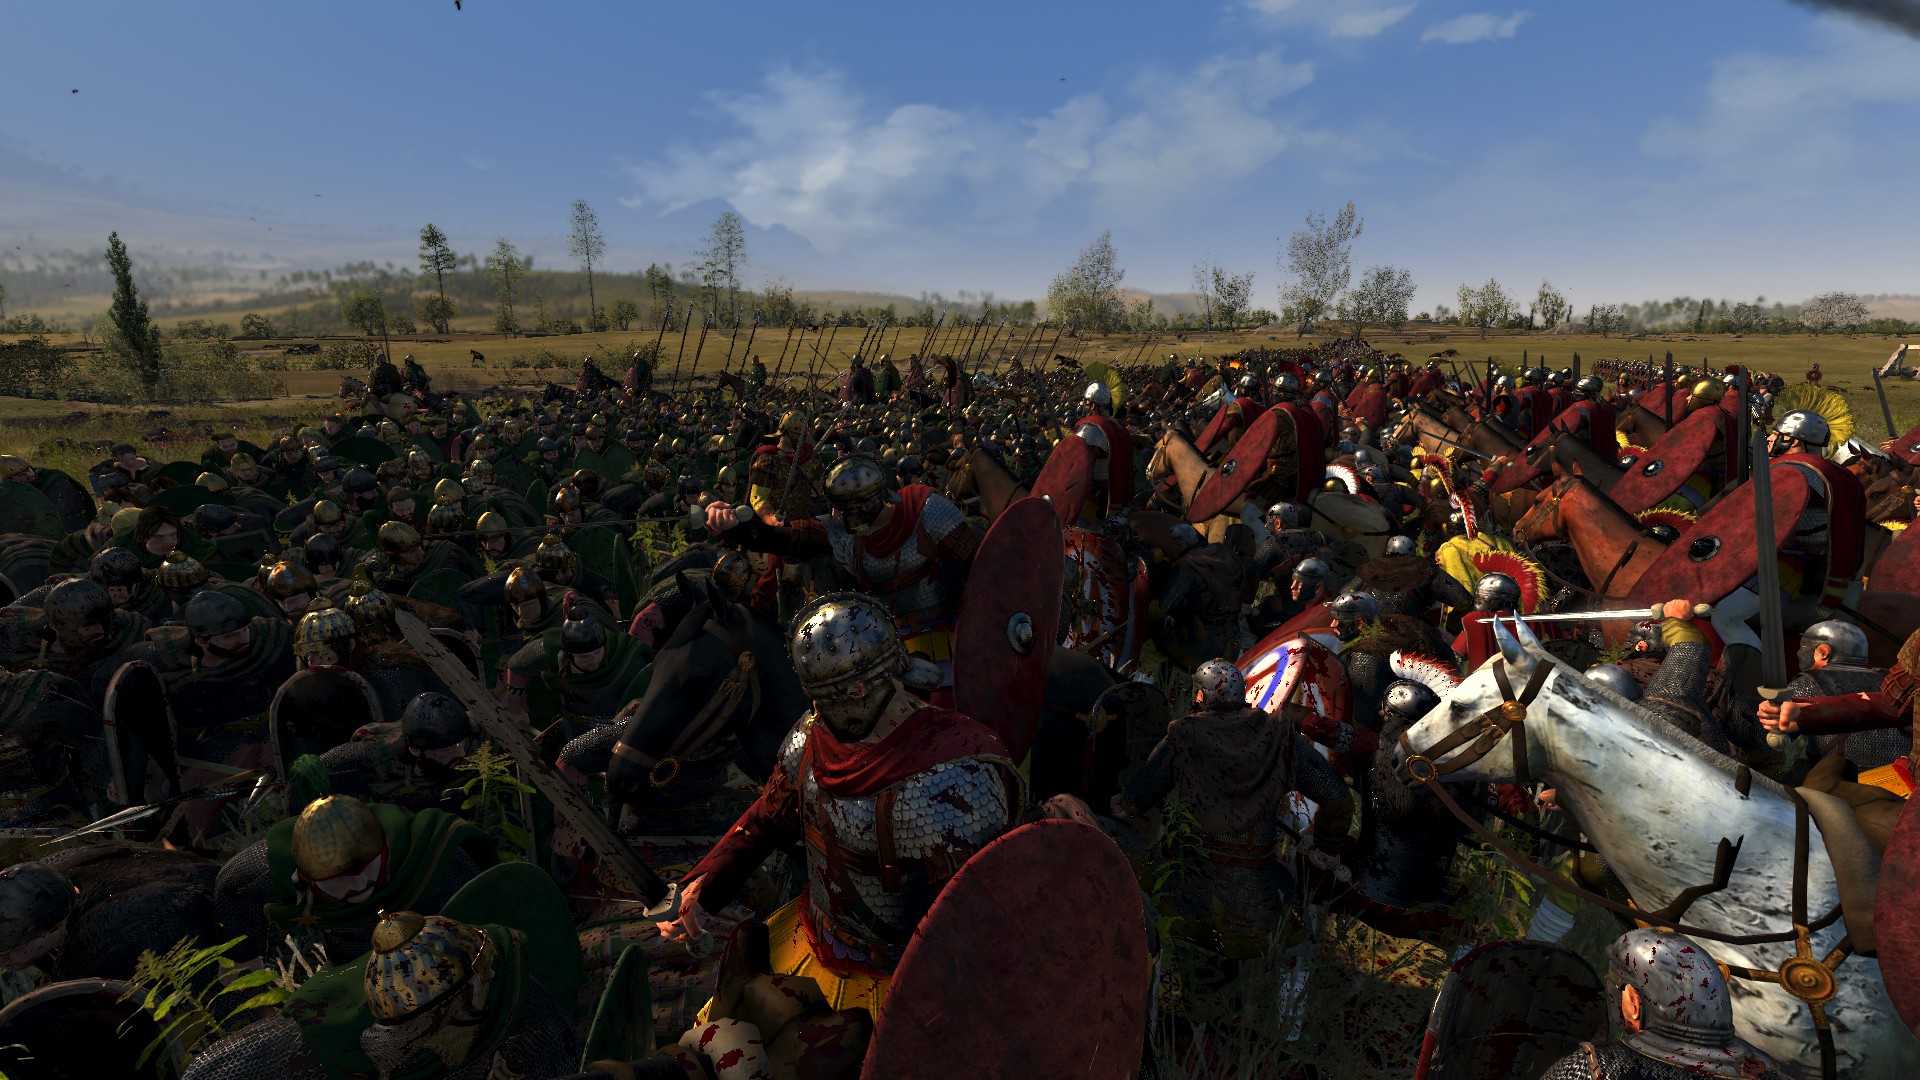 agrez all in one mod for total war attila, image 24, image, screenshots, sc...